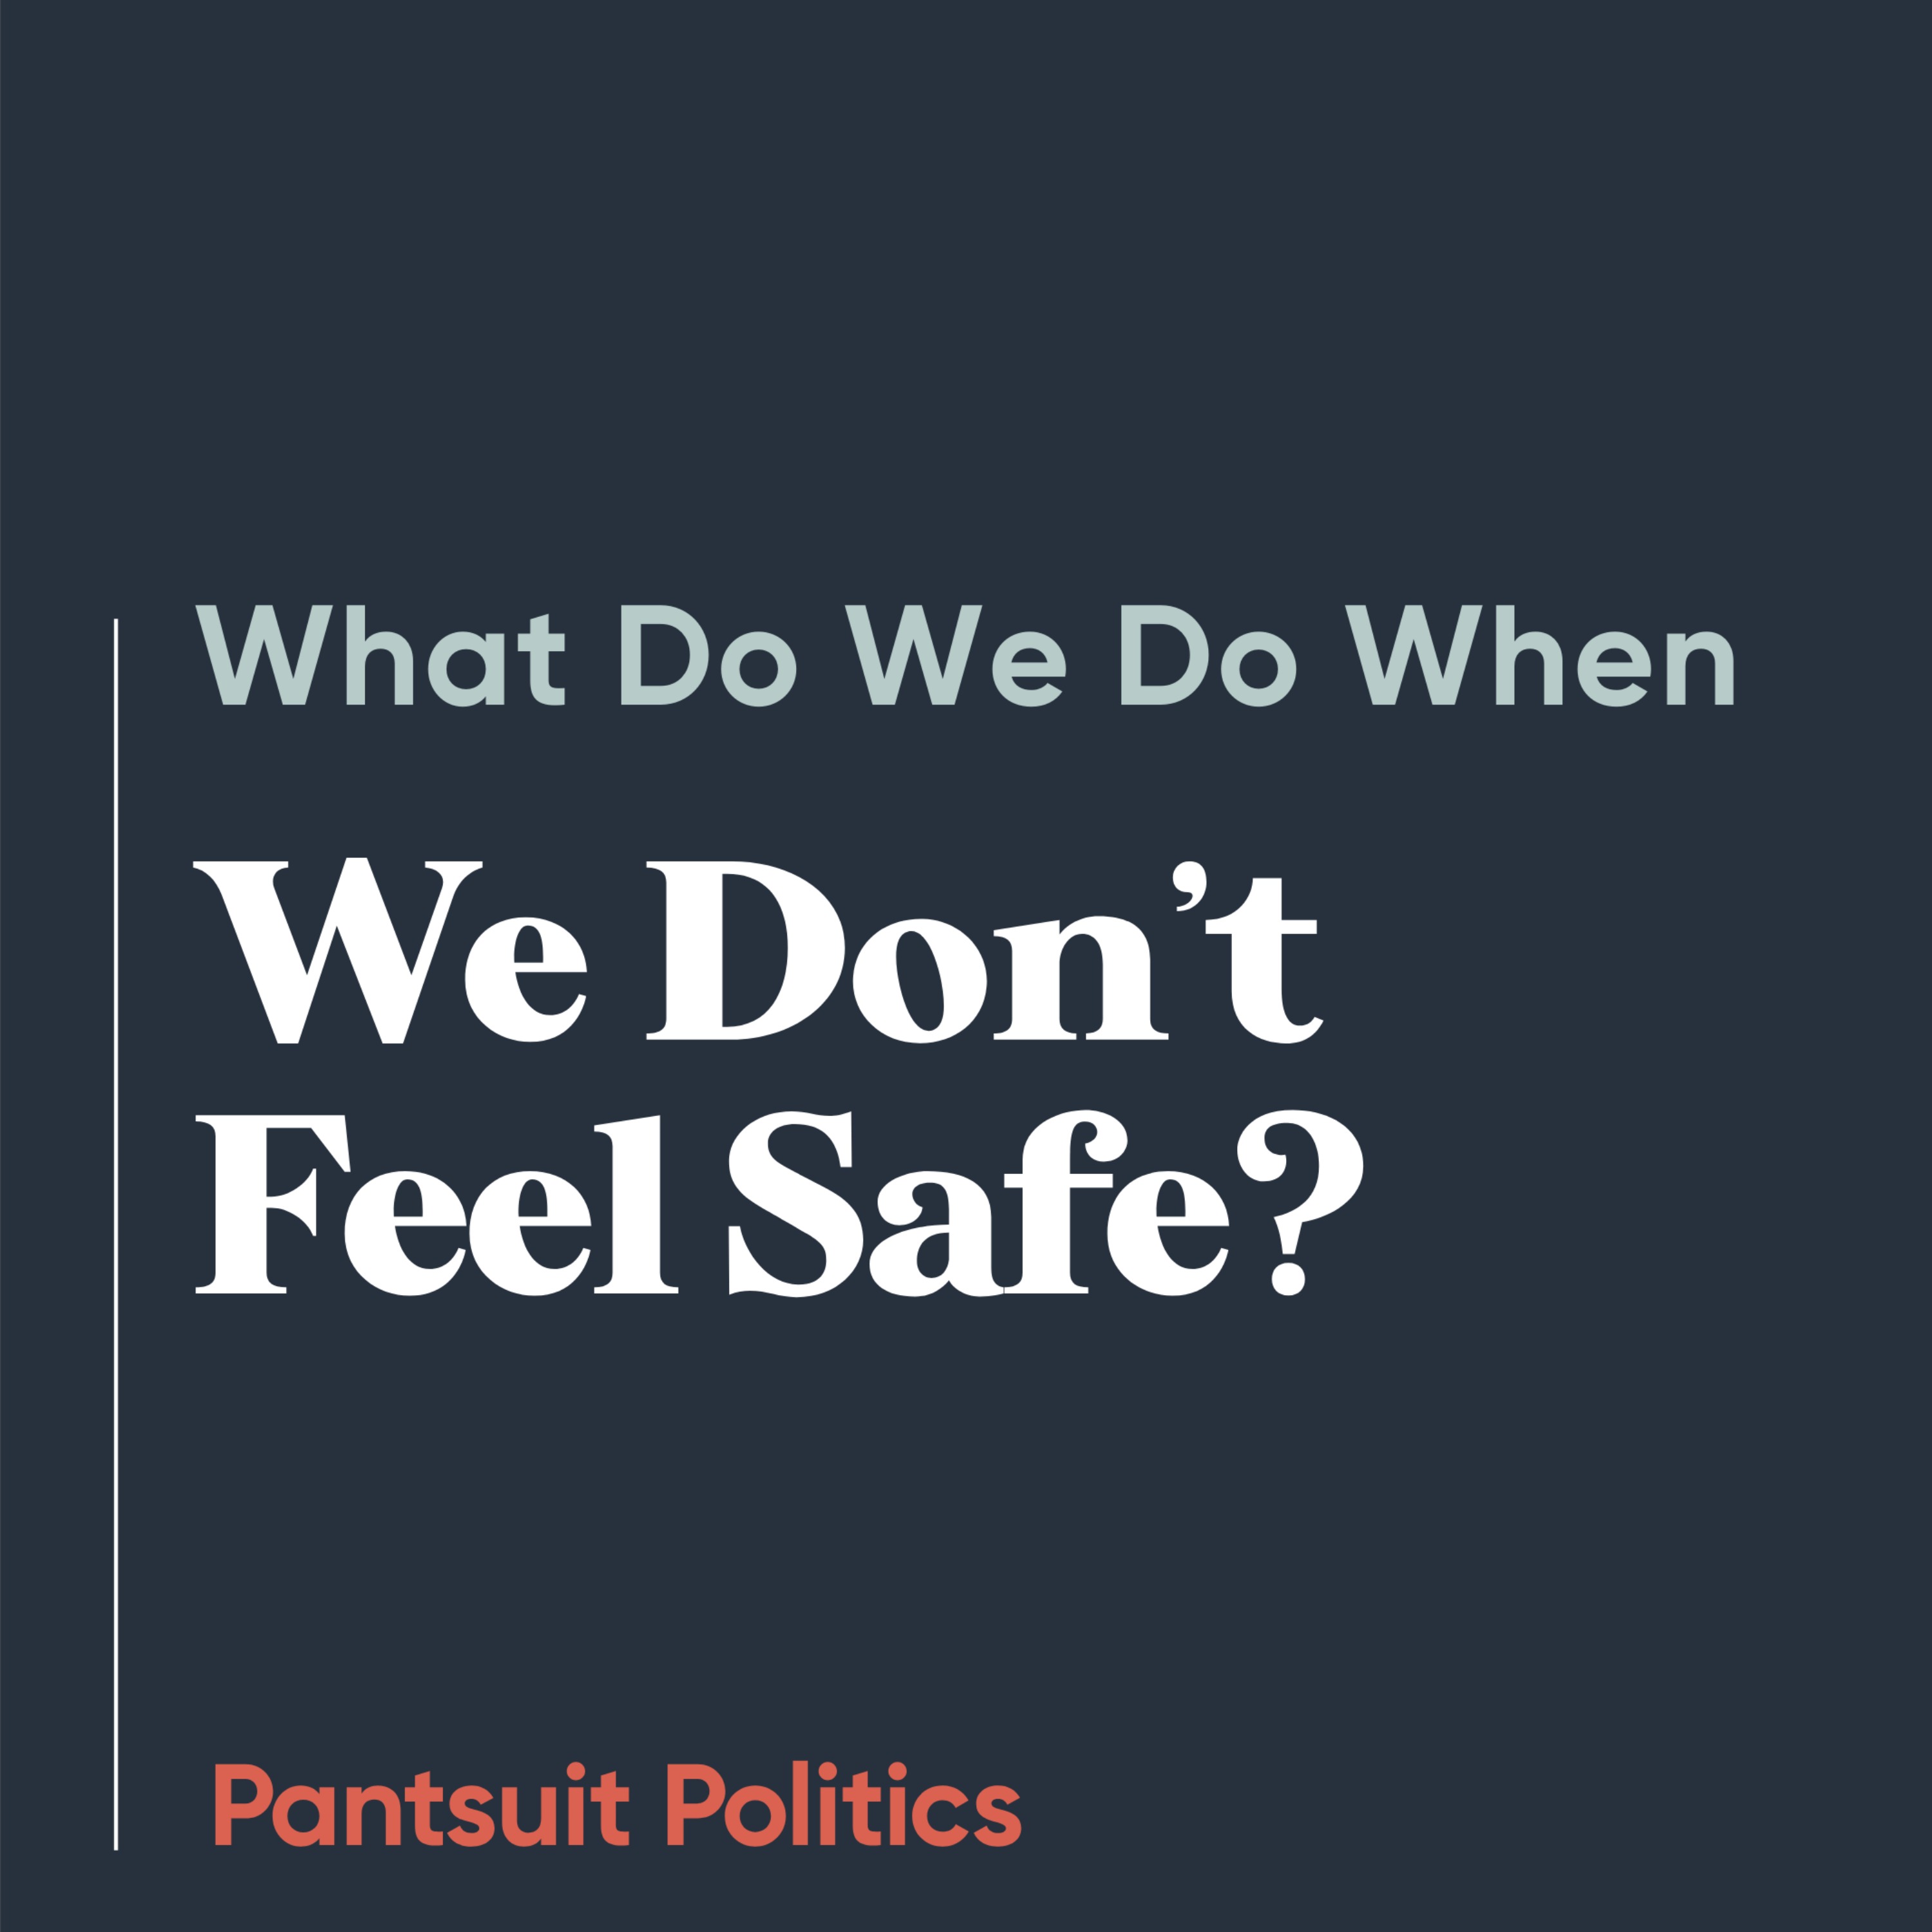 Crime: What Do We Do When We Don't Feel Safe?